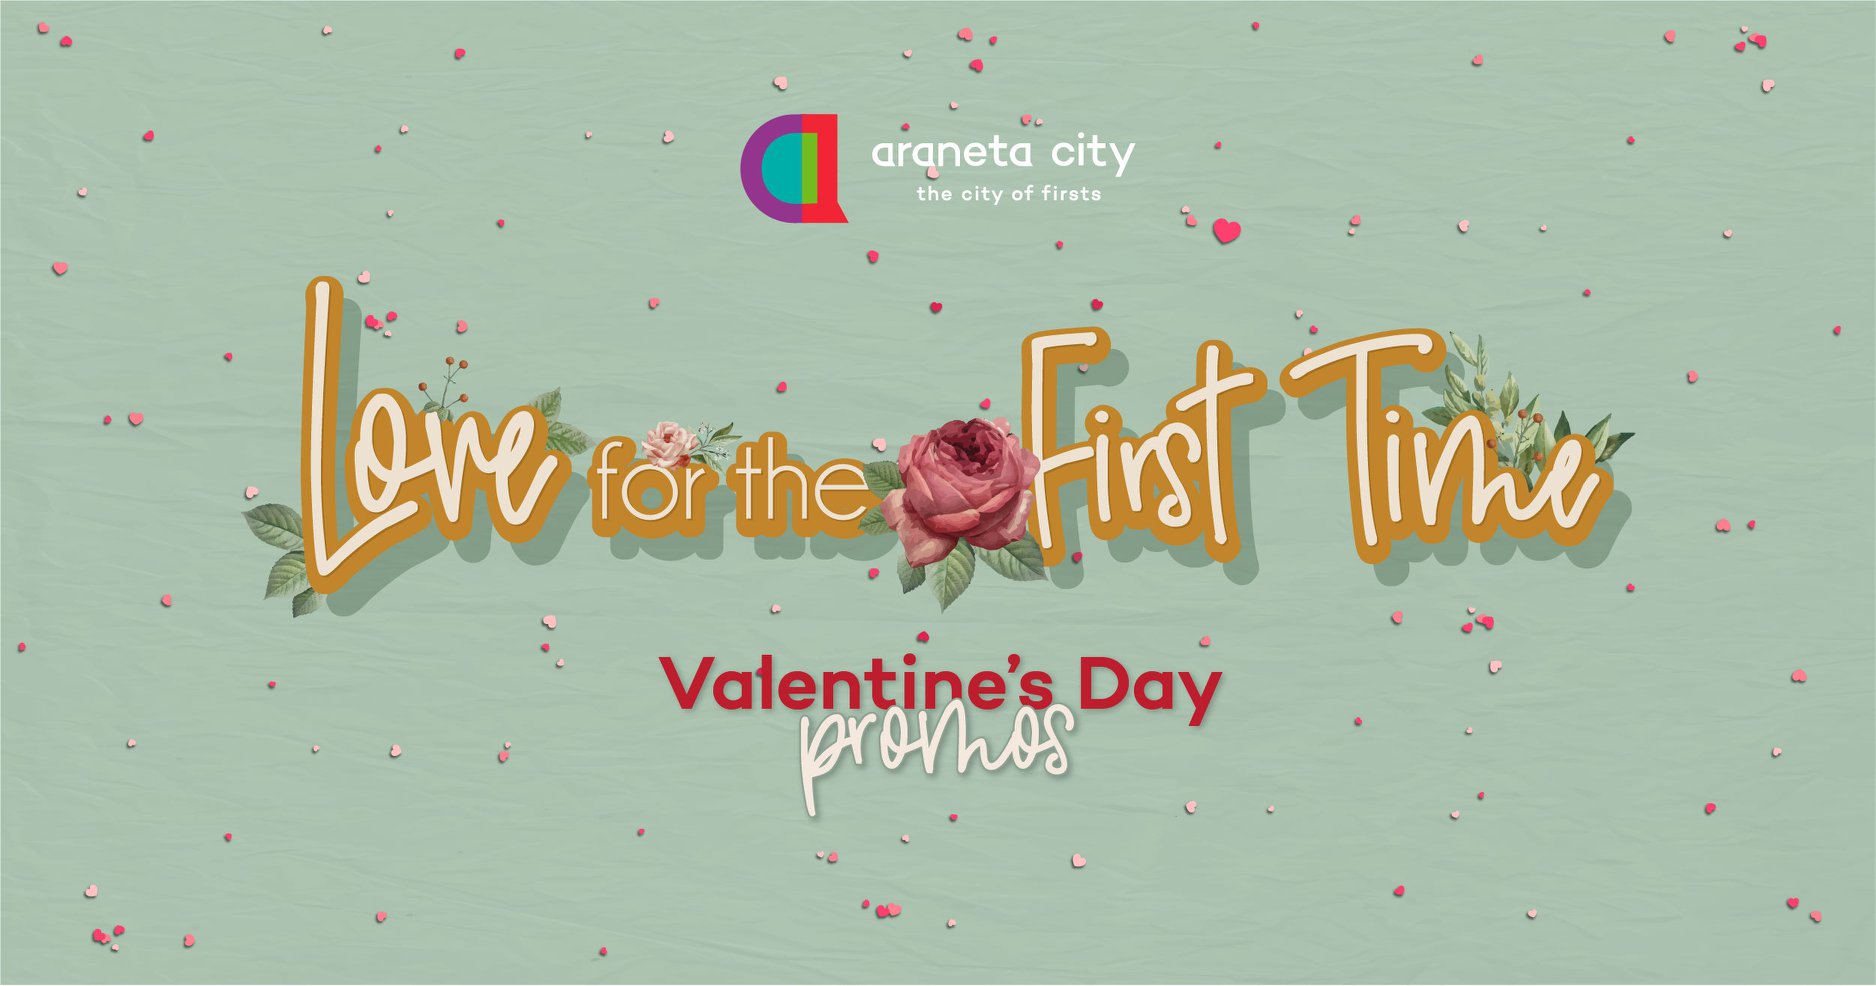 Love for the First Time at Araneta City